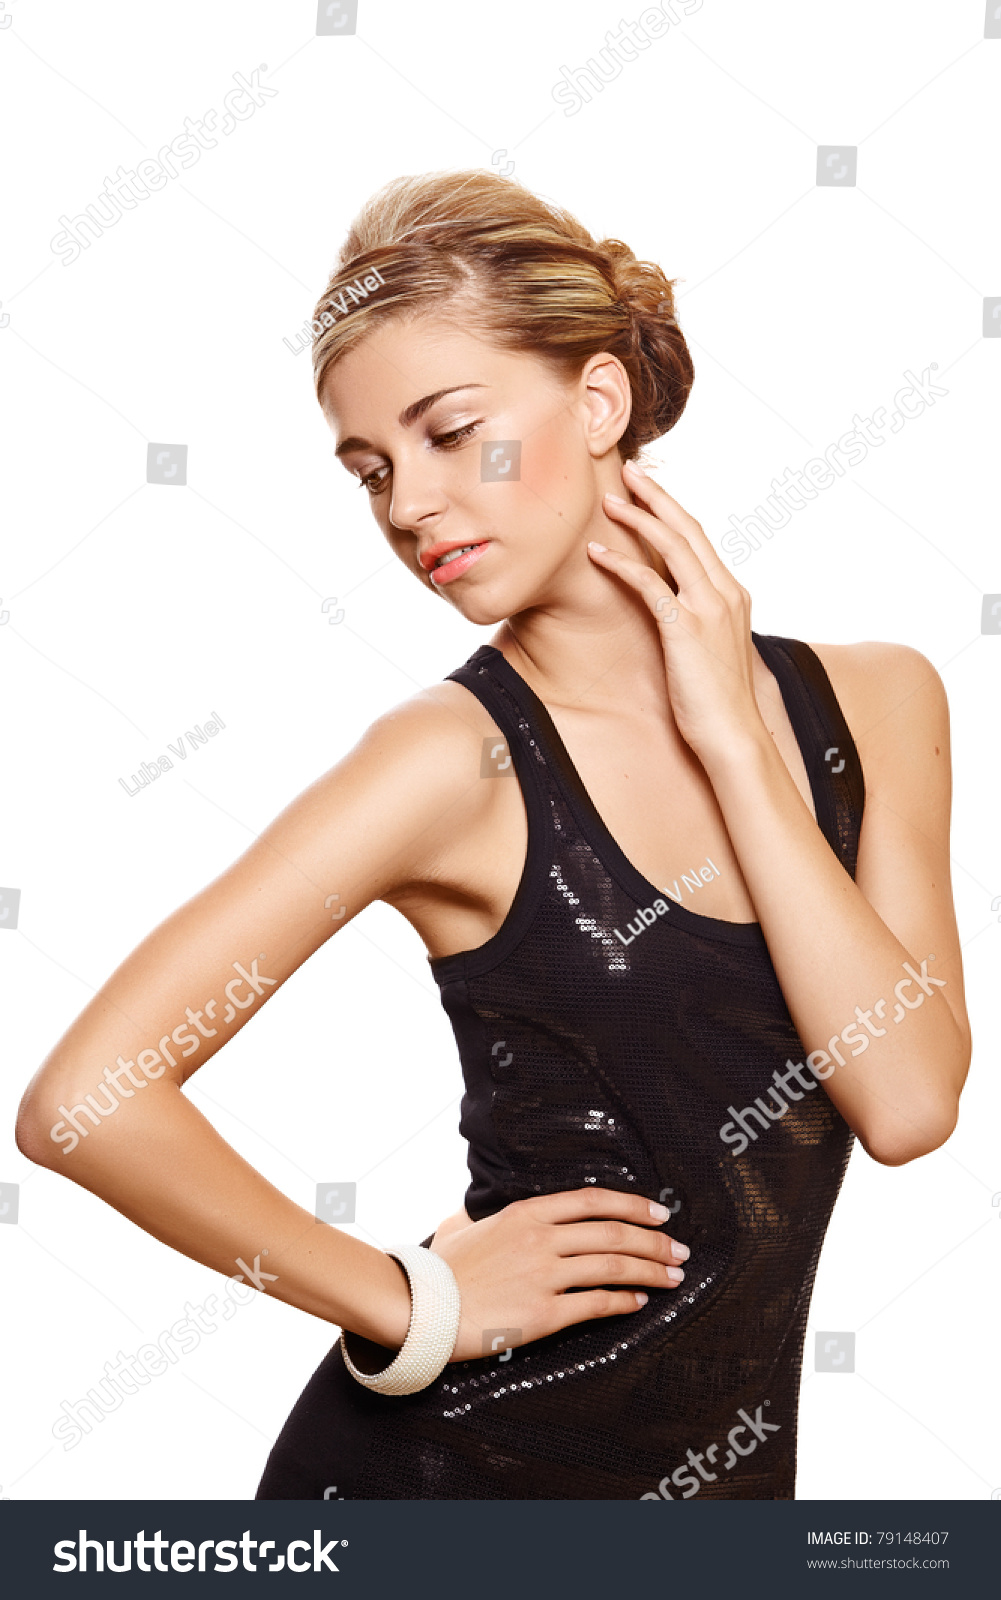 Beautiful Tanned Young Woman Wearing Fashion Royalty Free